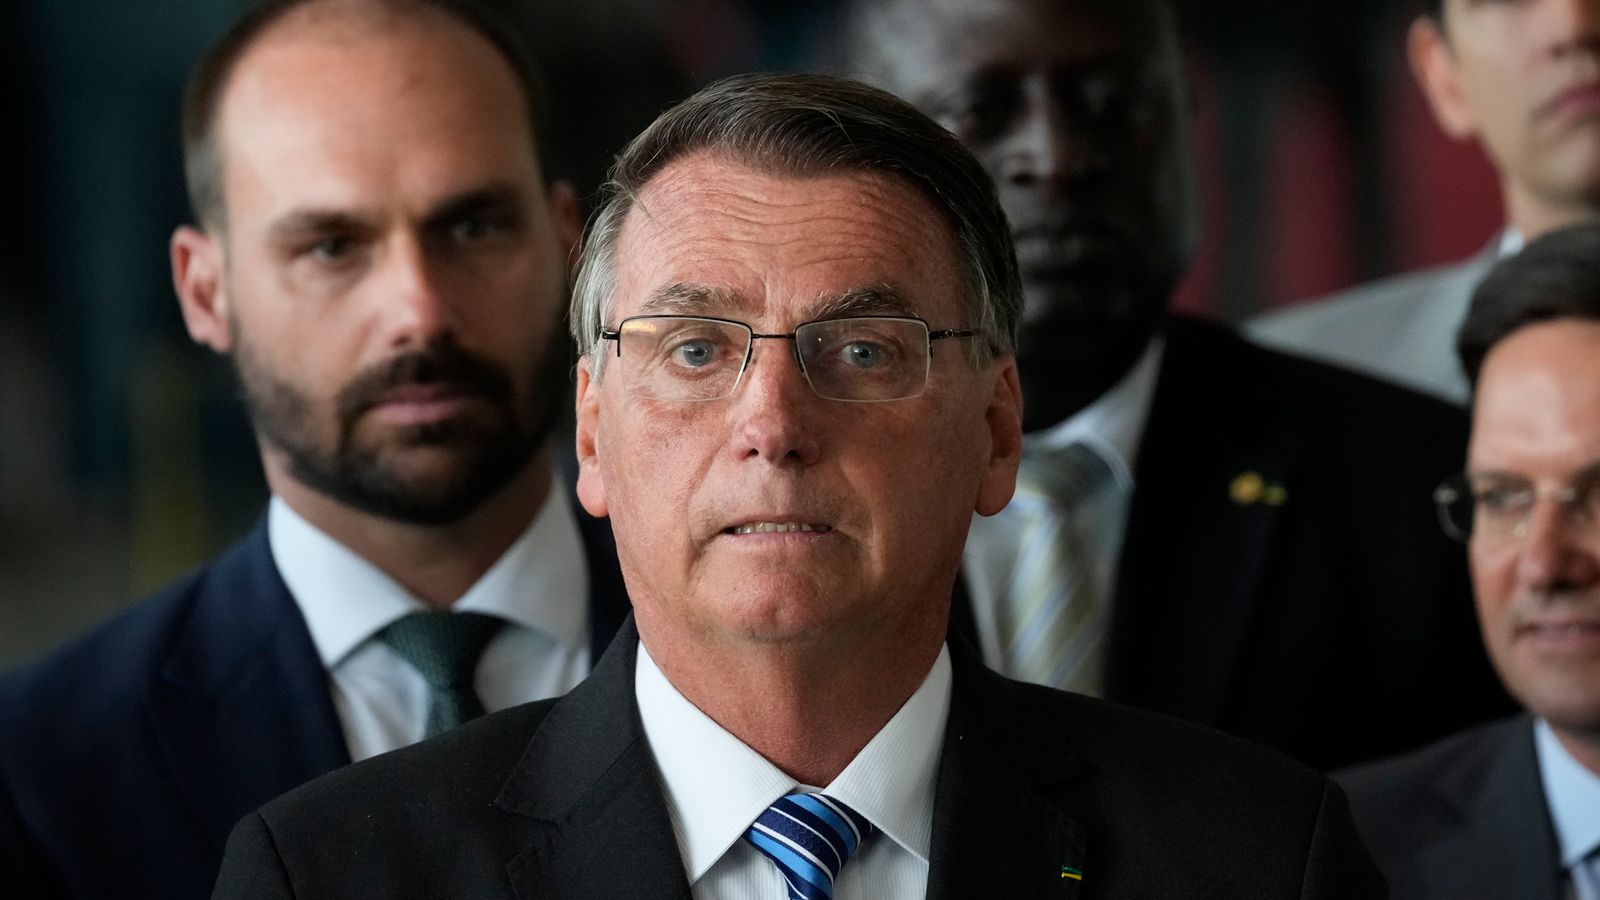 Bolsonaro does not concede defeat in first remarks since Brazilian election